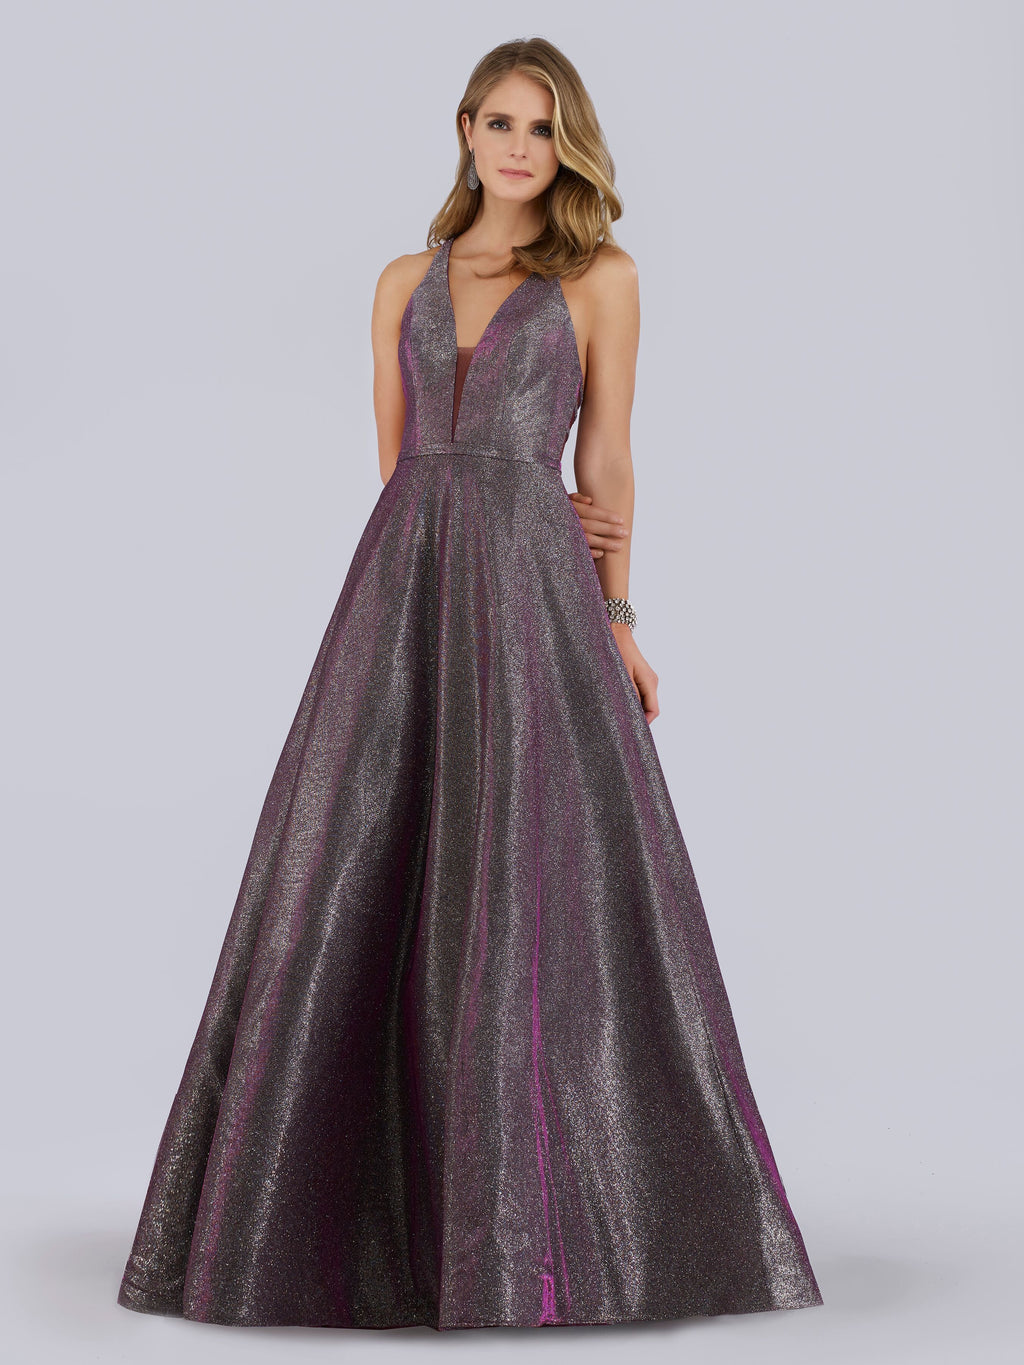 Lara Dresses 29779 Shimmering A-line Gown - CYC Boutique